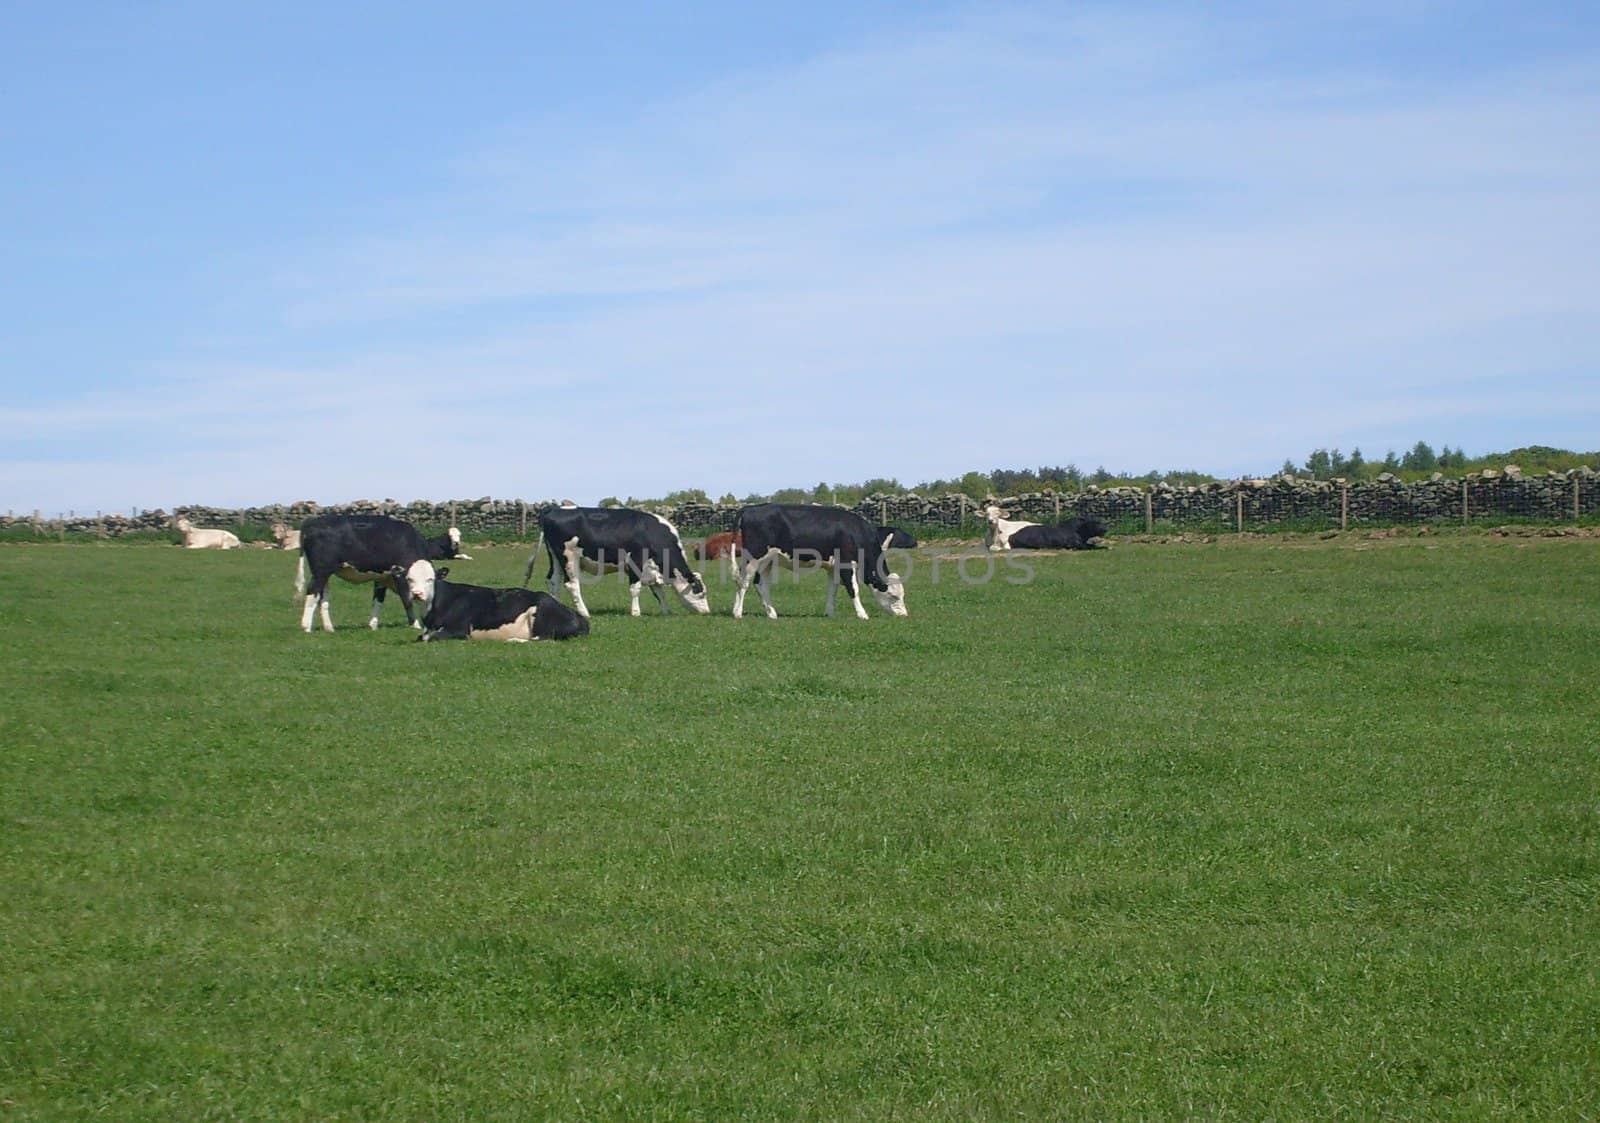 Cows  grazing in field in agricultural landscape, North Yorkshire National Park, England.